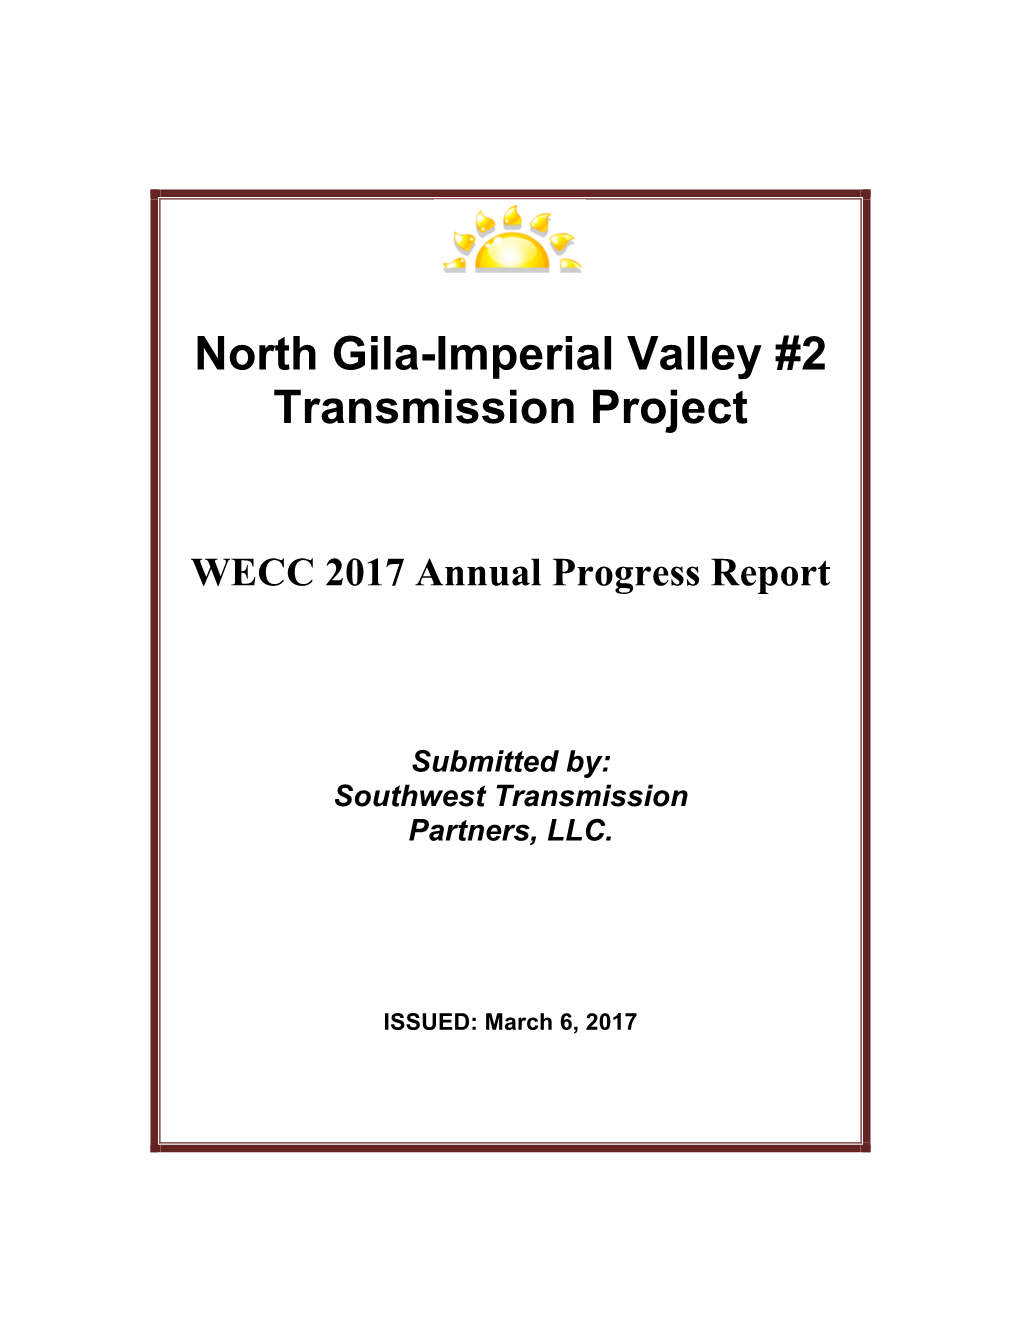 North Gila-Imperial Valley #2 Transmission Project